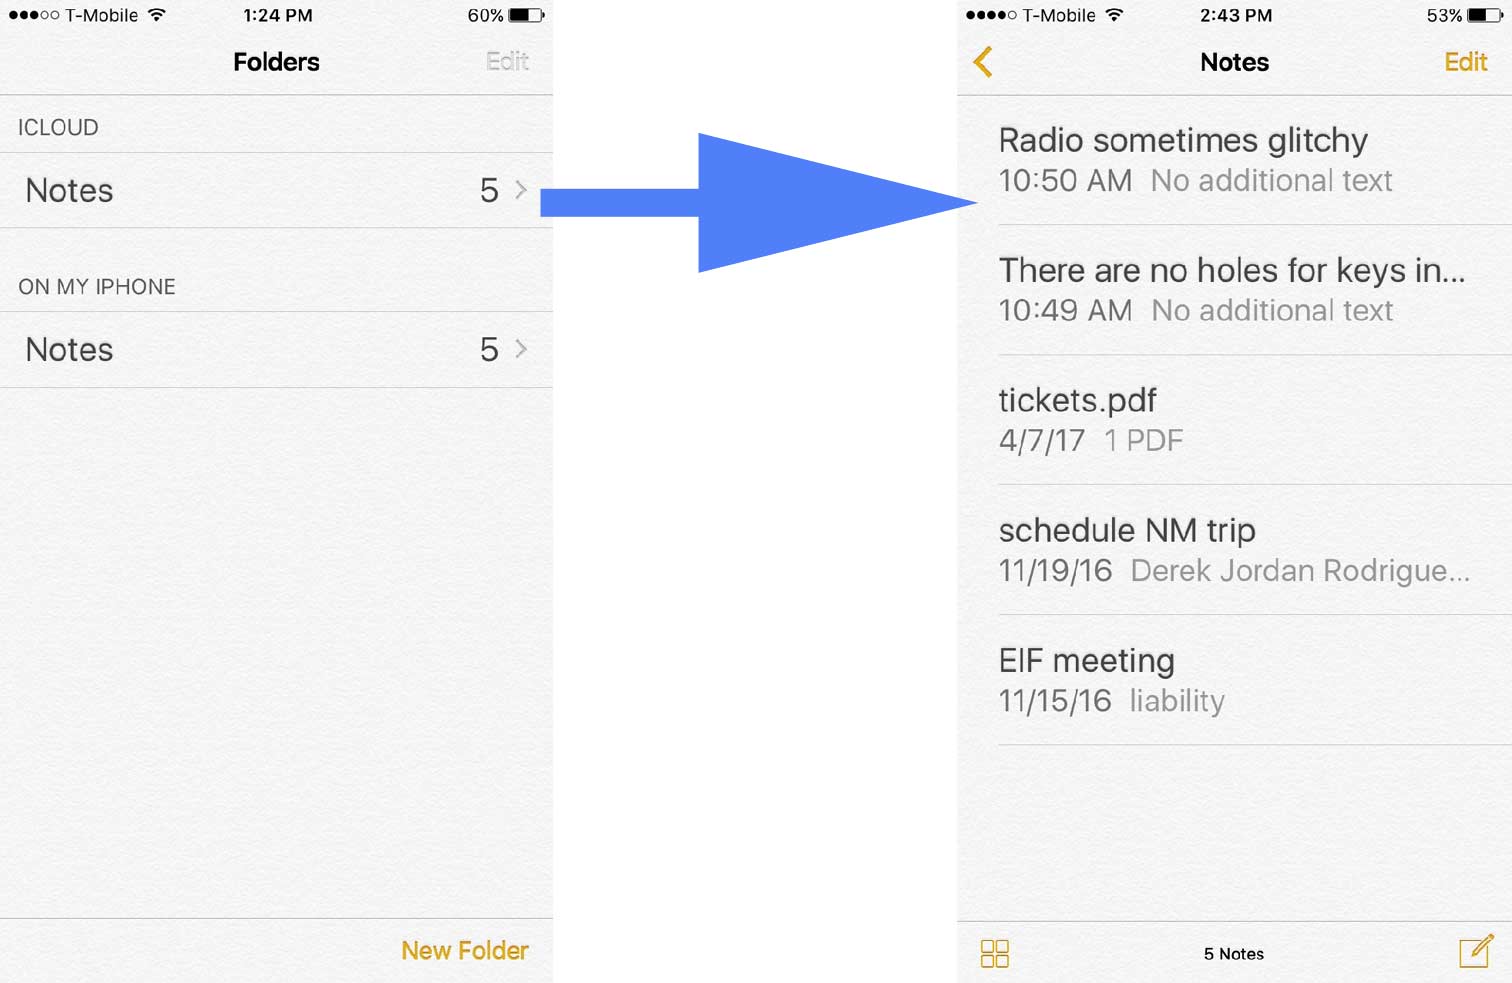 Notes land in the iCloud section